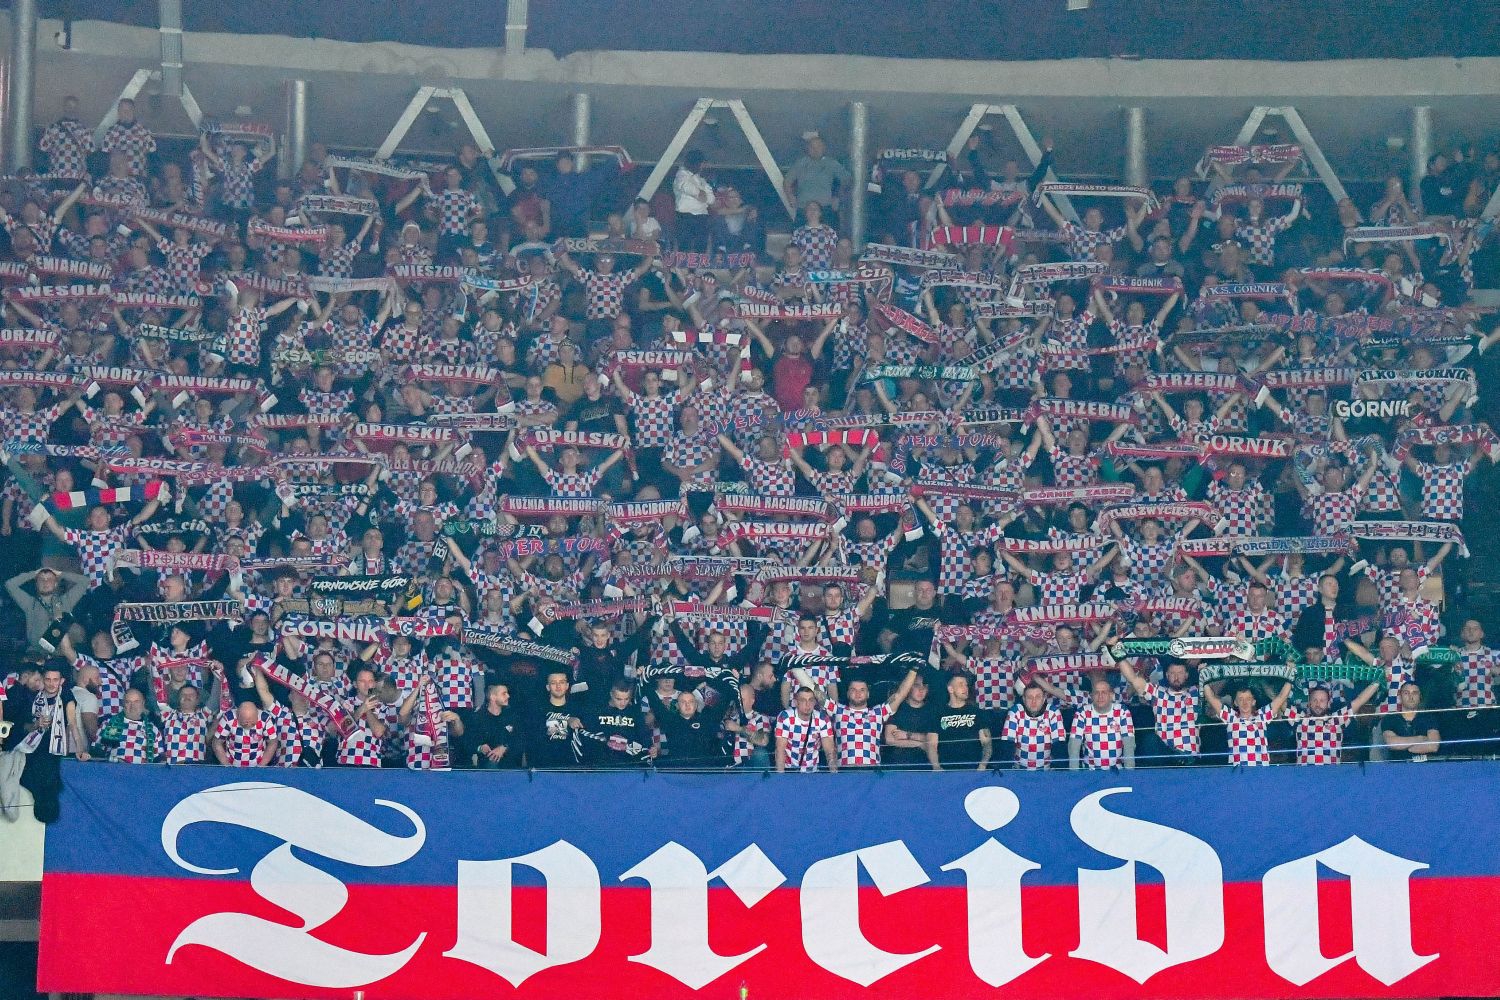 Gornik Zabrze fans have strong news.  “Trash like you should be thrown in the trash.”